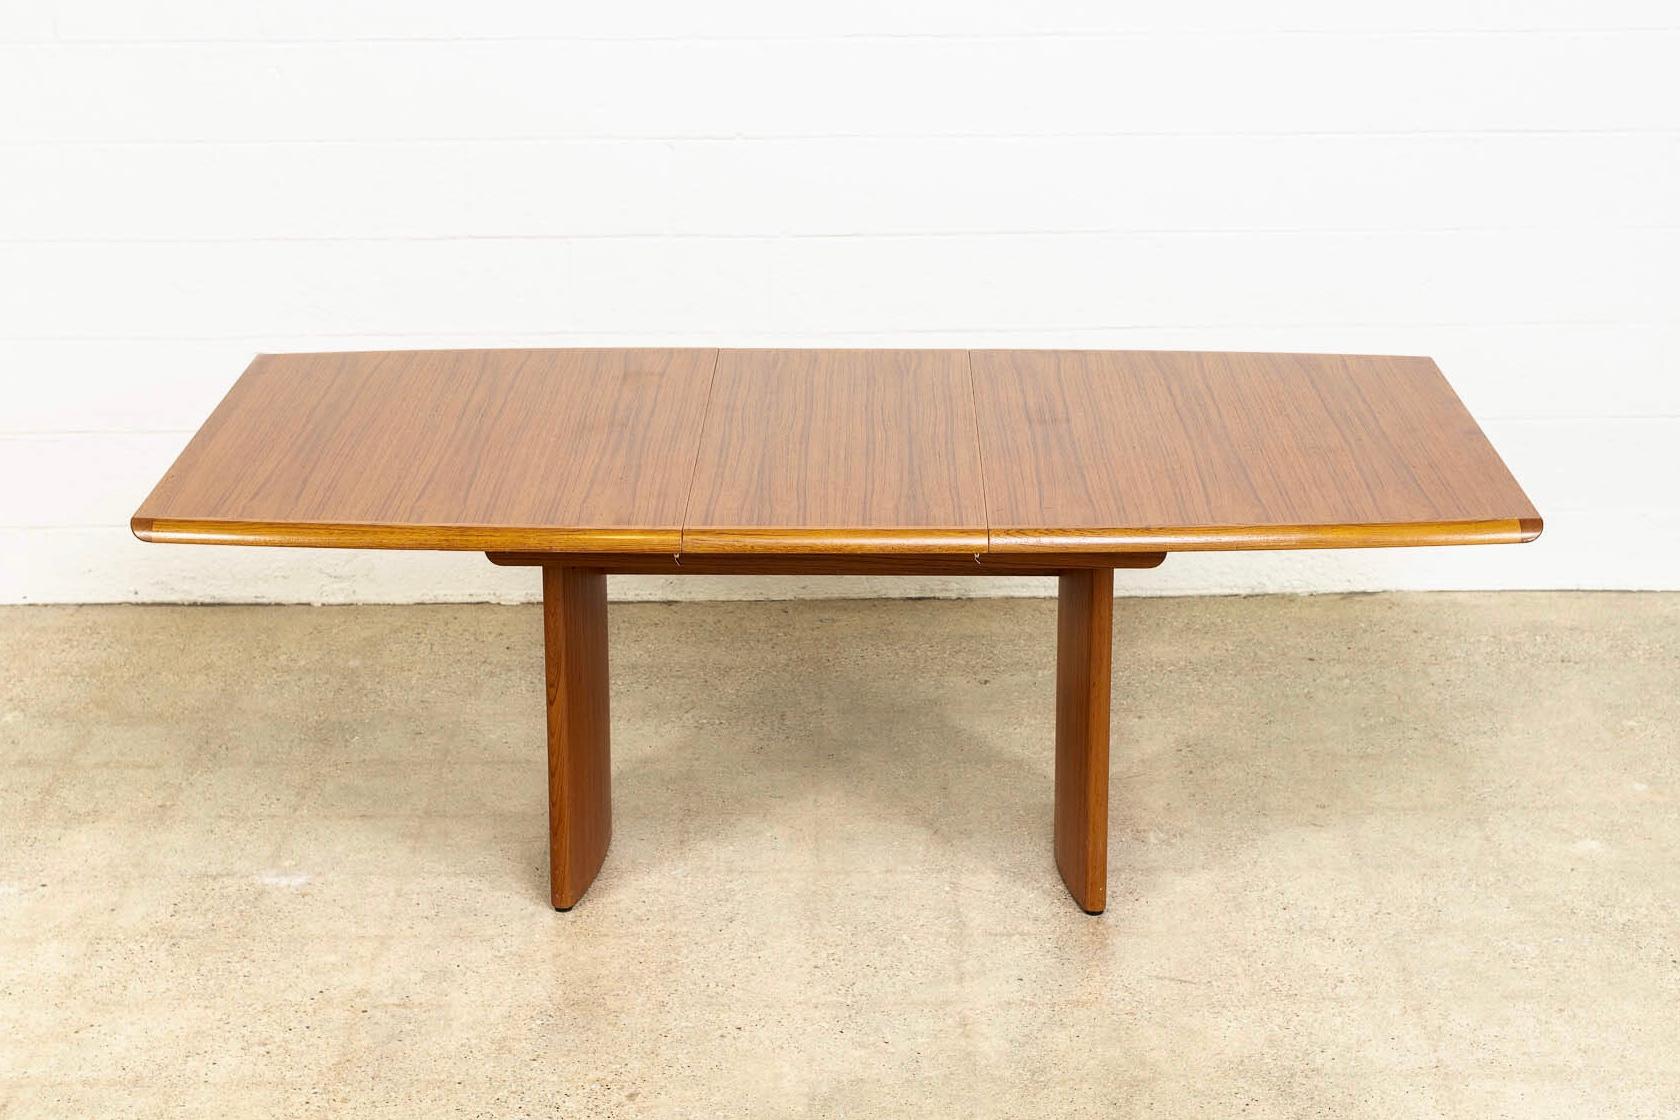 This vintage Mid-Century Modern teak wood expandable dining table was made in Denmark by Vejle Stole O.G. Møbelfabrik circa 1960. It has an elegant Minimalist aesthetic and a clean, unimposing Danish modern design. It is exceptionally crafted from